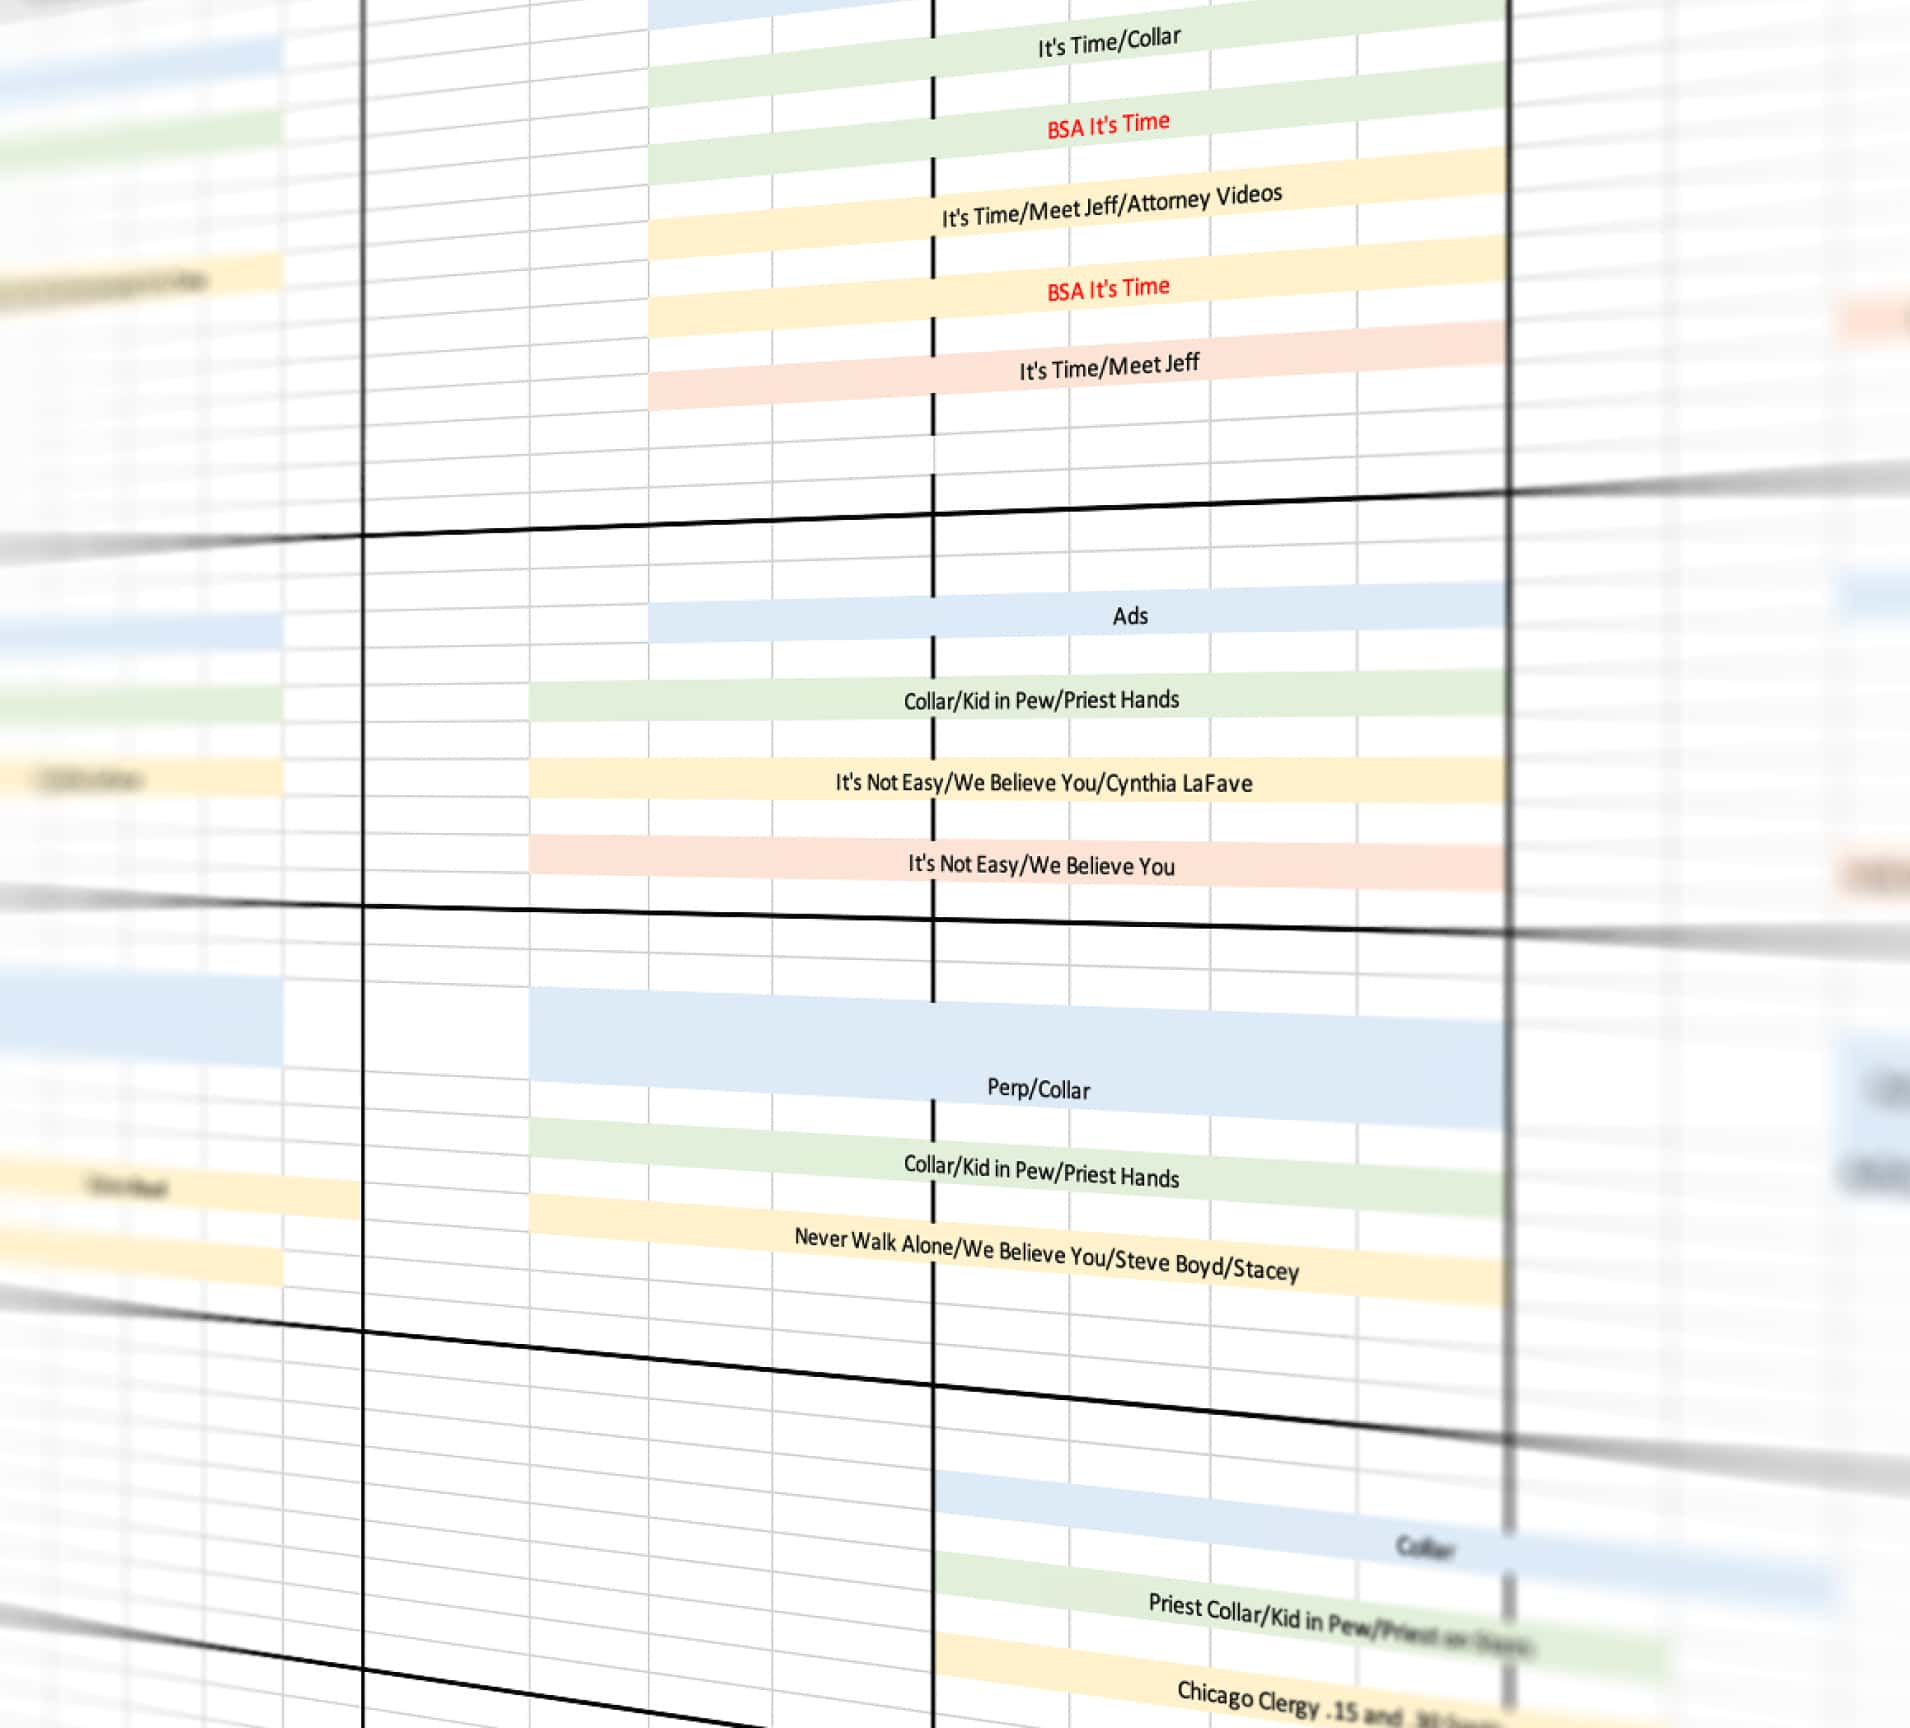 A close-up of a media scheduling spreadsheet.